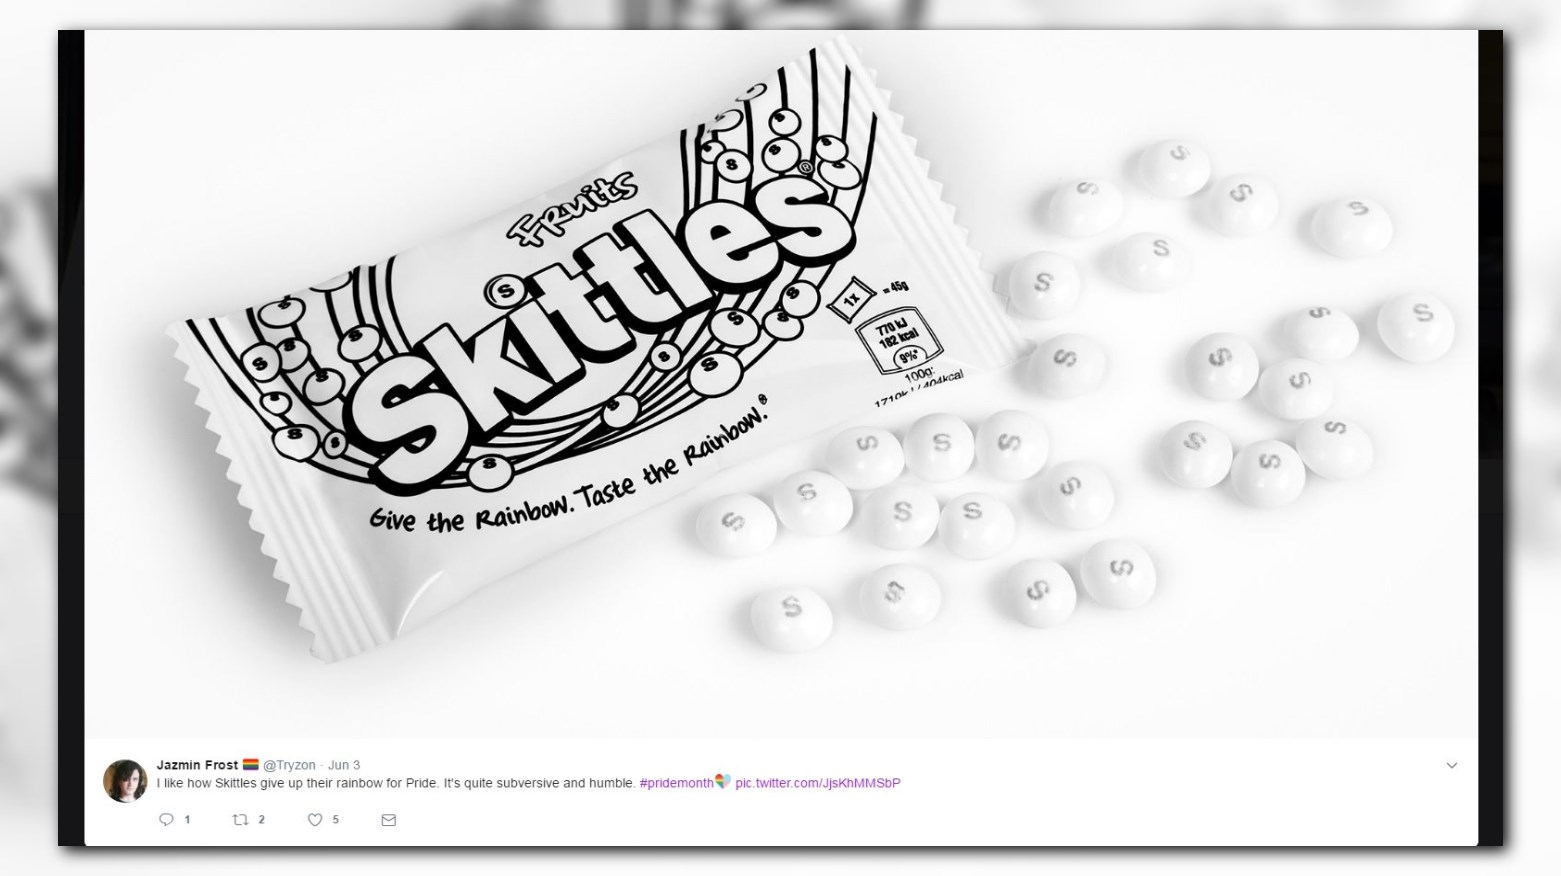 Skittles went white for Pride Month